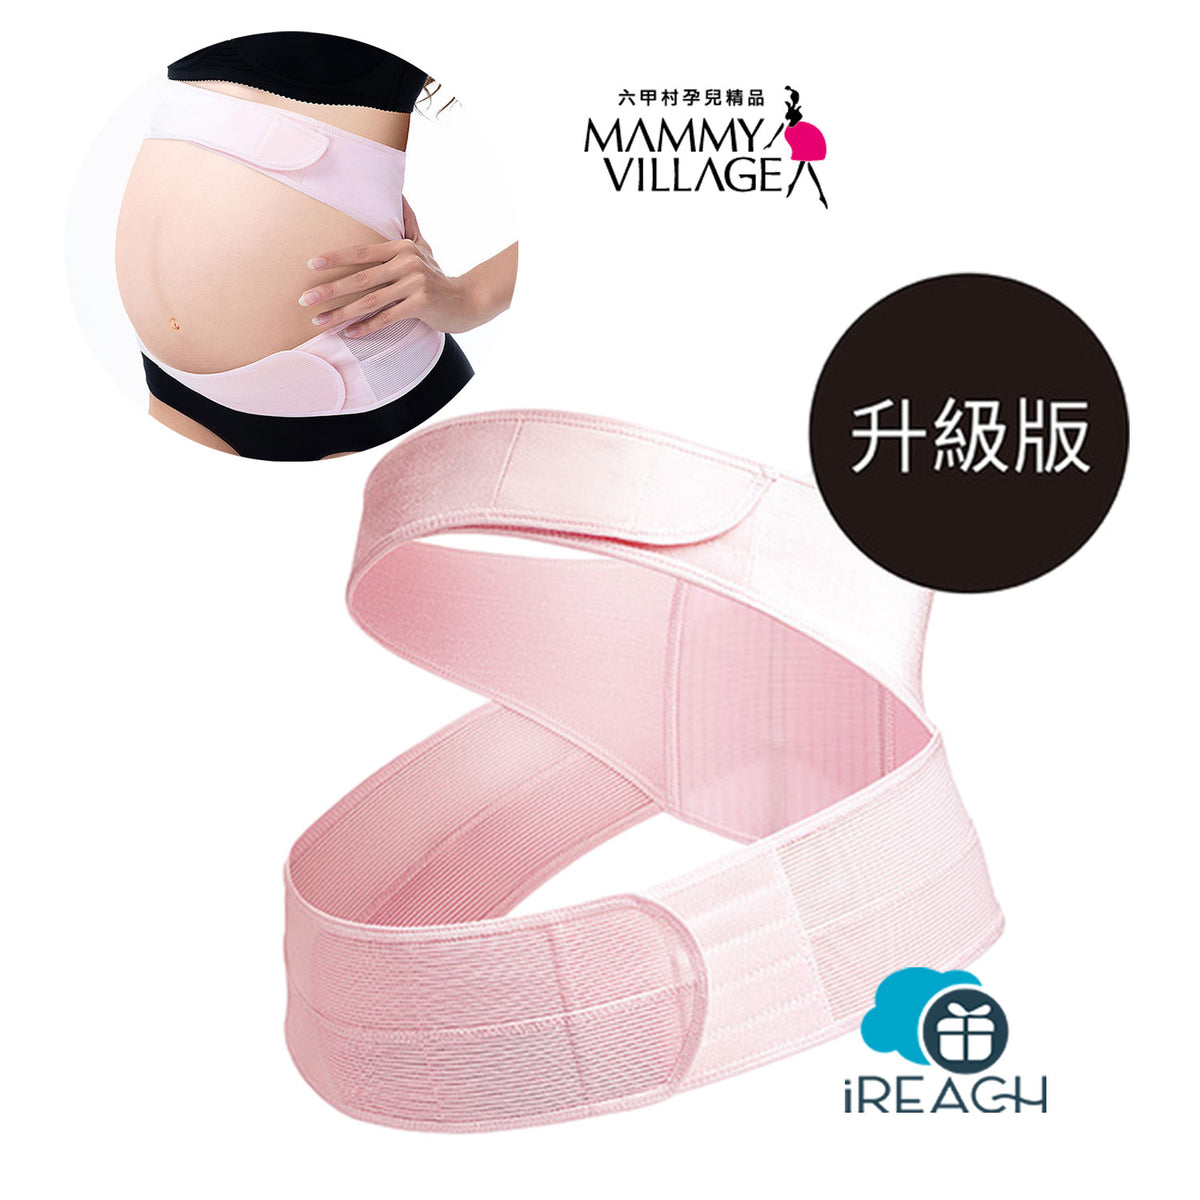 Mammy Village Thin Cicada Wing Ultra-Light Elastic Maternity Support Belt L Pink [Authorized Goods]